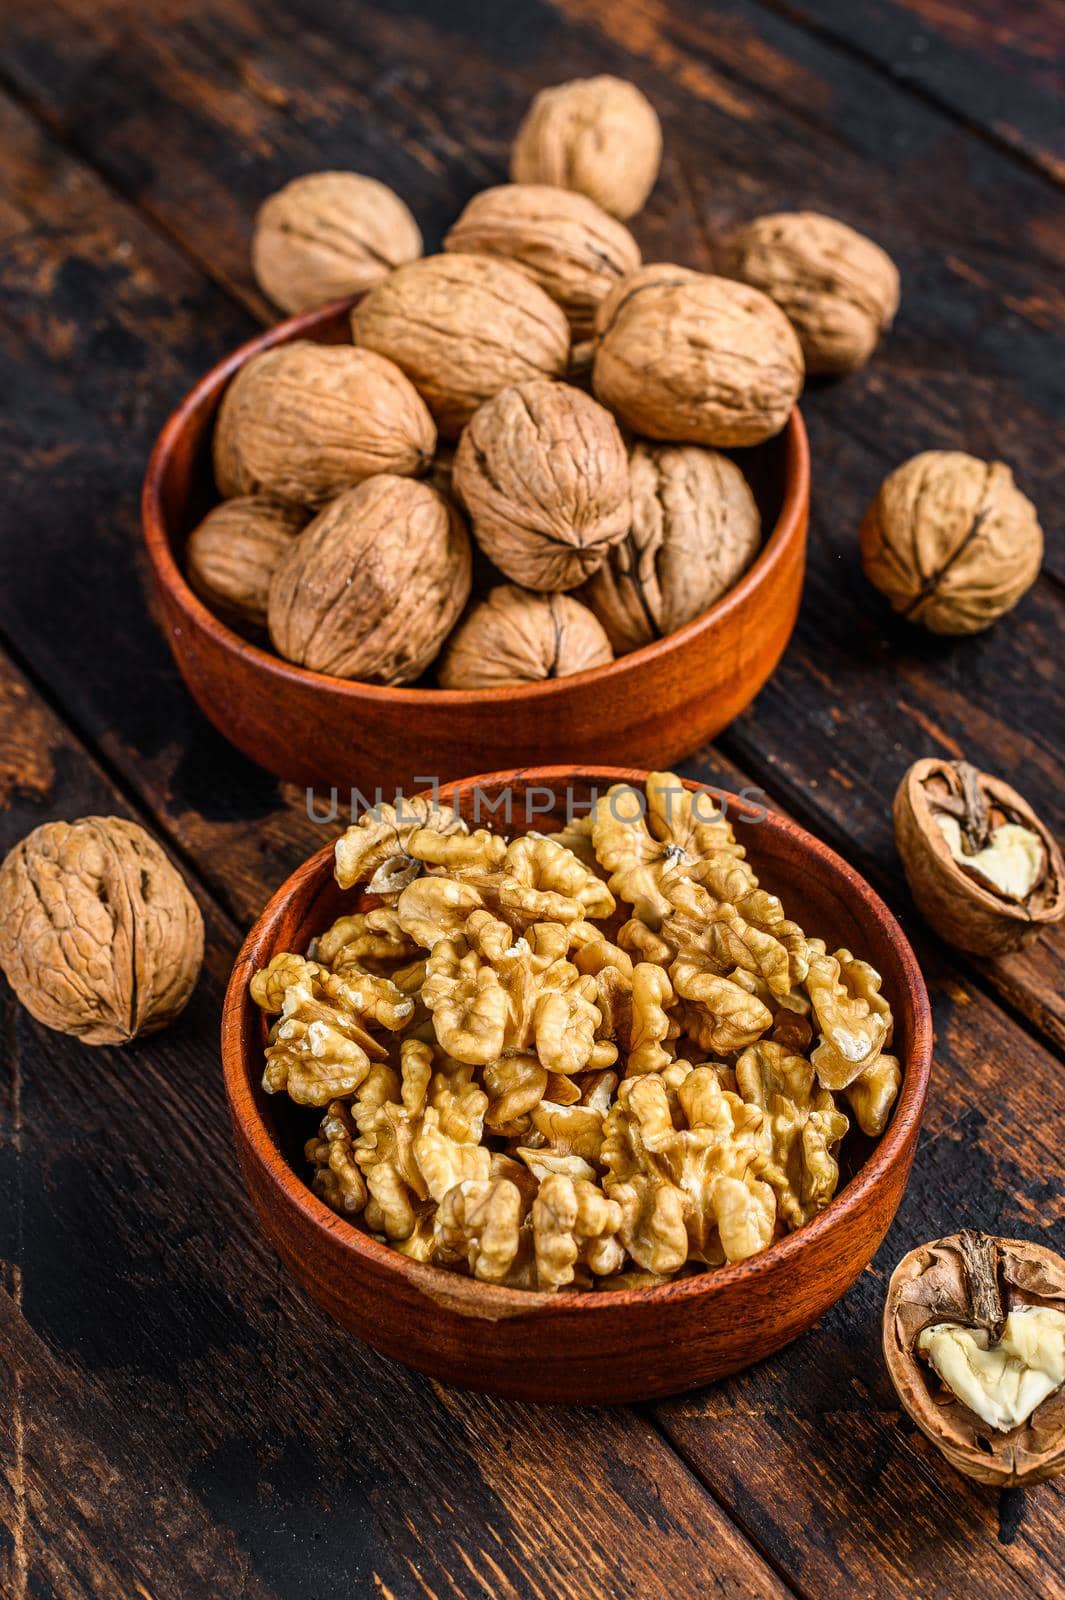 Shelled walnuts on wooden table. Dark background. Top view by Composter